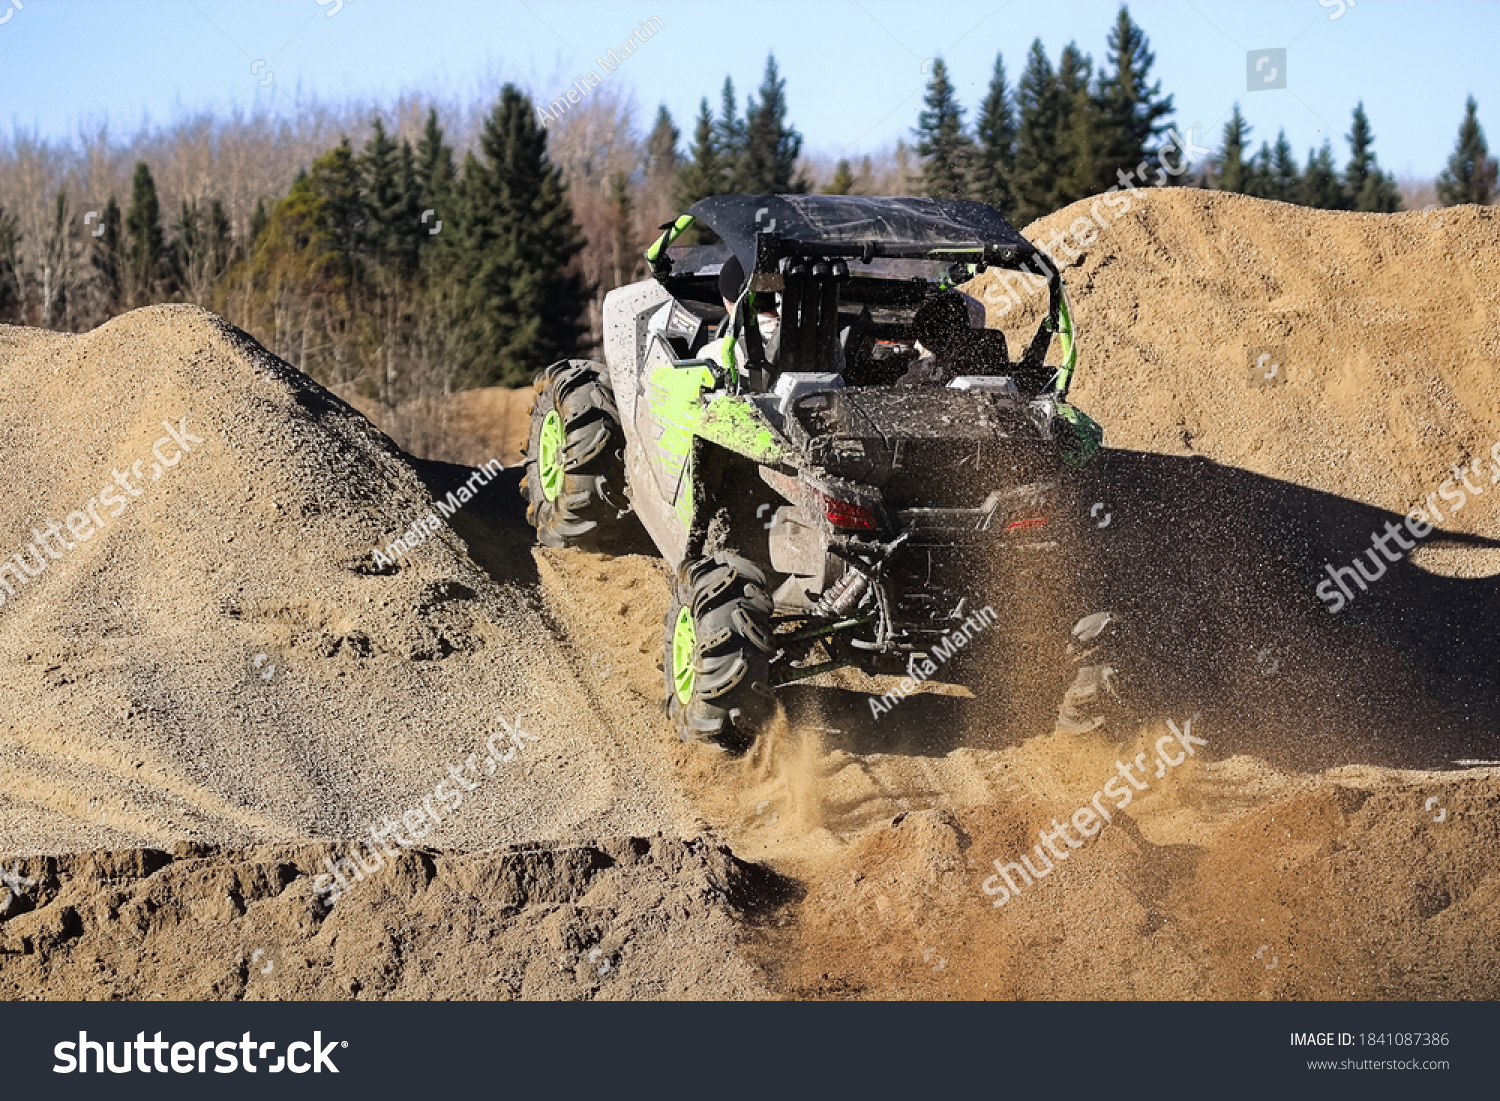 A side-by-side ripping up dirt as it goes up a gravel hill #1841087386